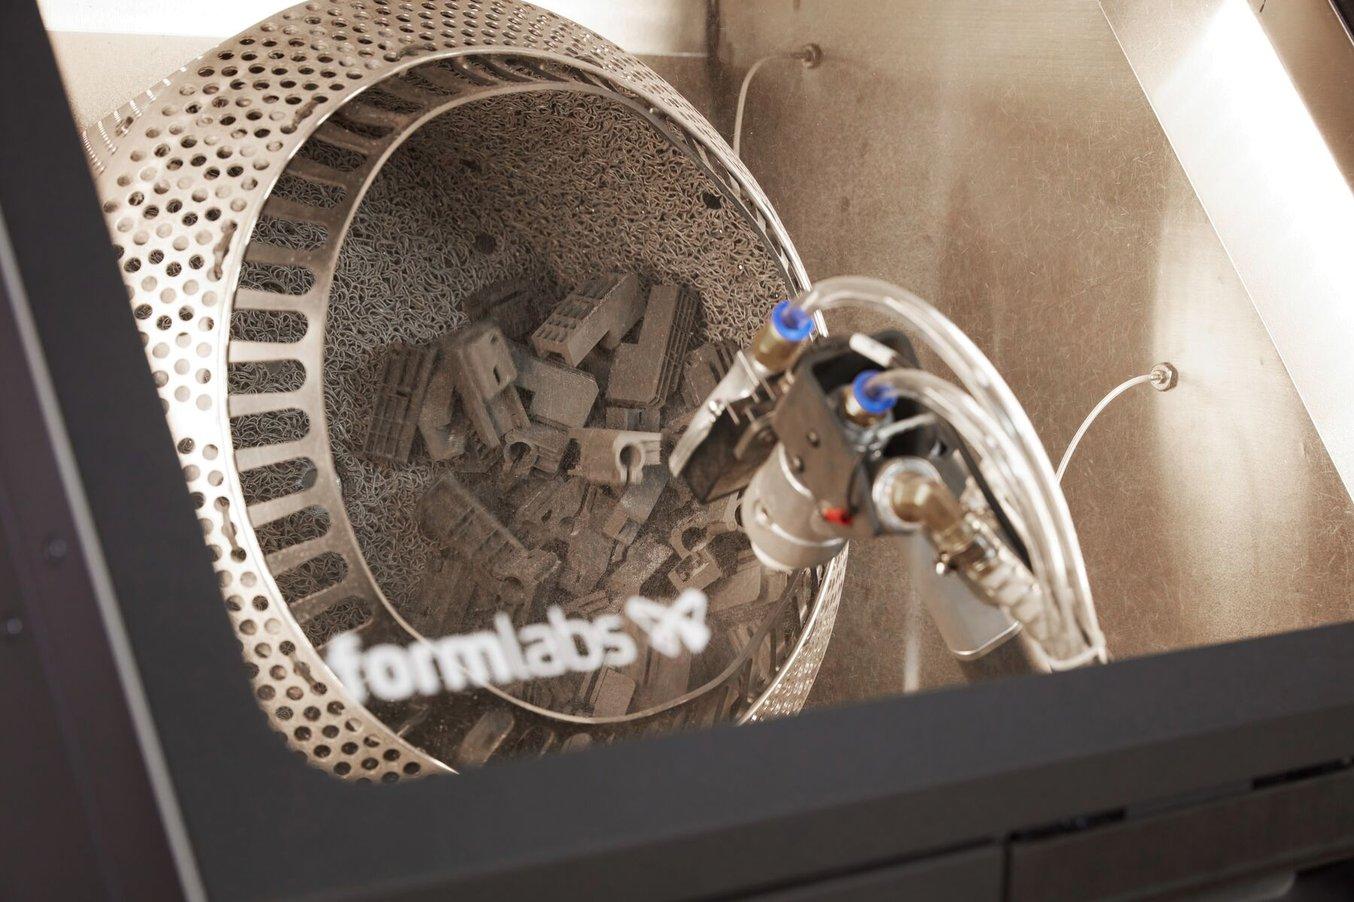 the tumbling basket inside the Fuse Blast gently rotates parts as the blasting nozzle removes powder